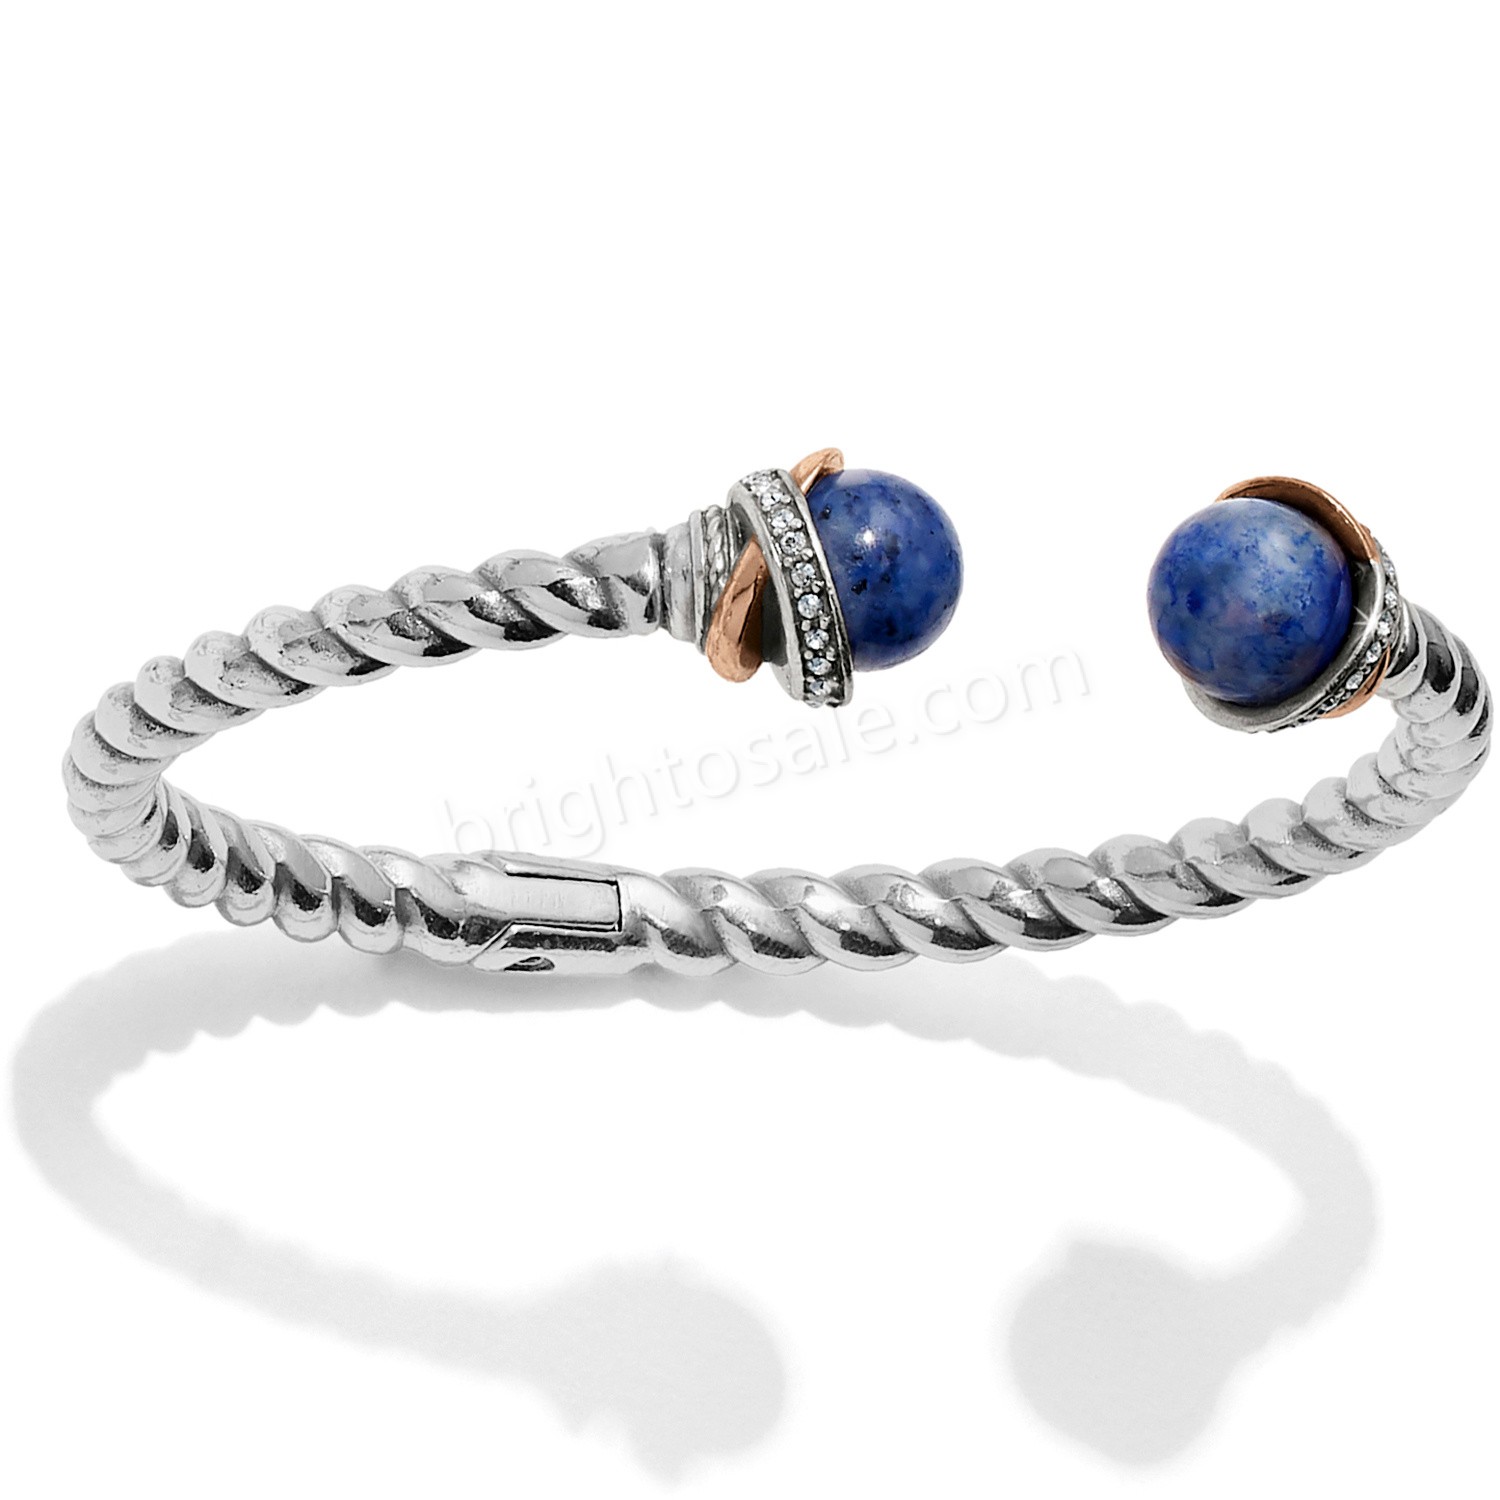 Brighton Collectibles & Online Discount Neptune's Rings Brazil Blue Quartz Open Hinged Bangle - Brighton Collectibles & Online Discount Neptune's Rings Brazil Blue Quartz Open Hinged Bangle